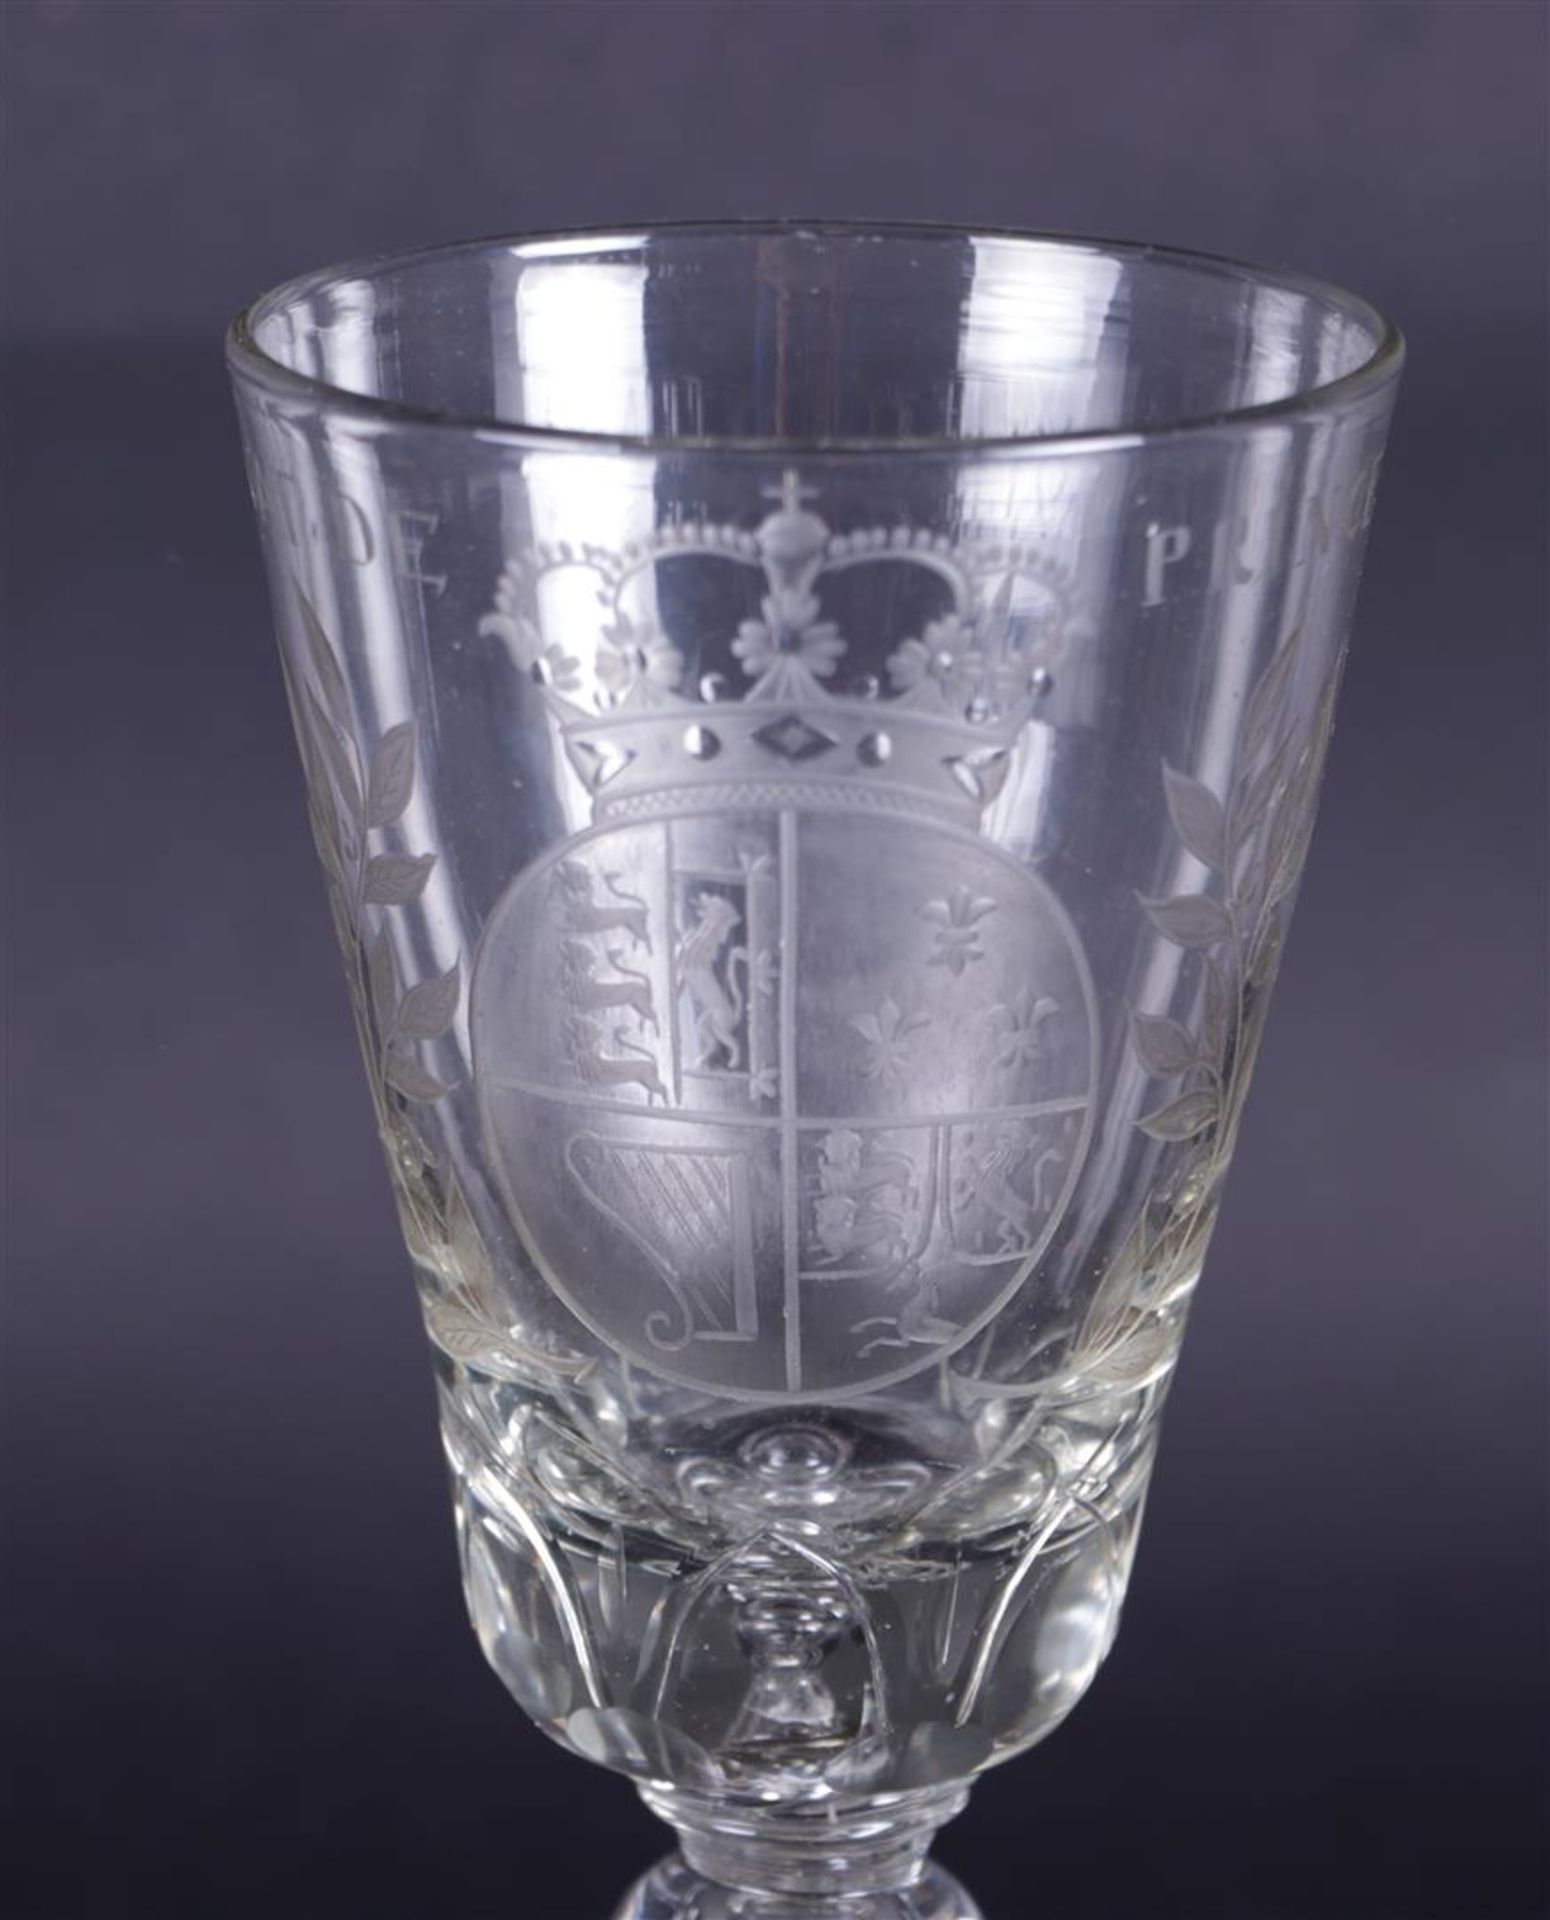 An etched wine glass with the English Royal coat of arms, above which the text "VIVAT DE PRINCES".
H - Image 2 of 5